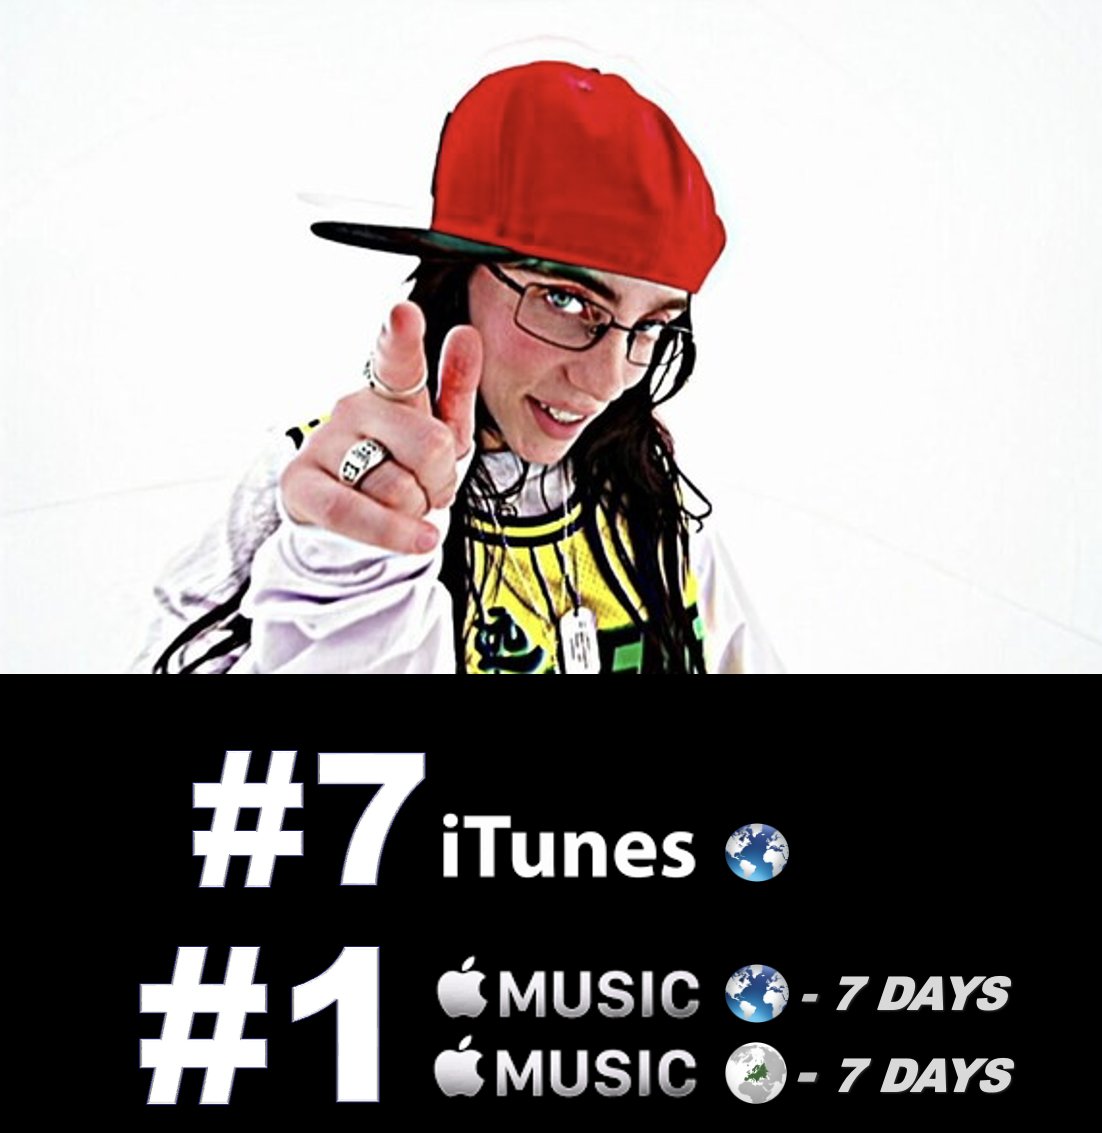 #BillieEilish's new track 'LUNCH' tops the Worldwide & European Apple Music Song charts for a 7th day! 💪1⃣🌎&🇪🇺🍎🎼✖️7⃣🕛👑❤️‍🔥 The song is #7 on the Worldwide iTunes Song chart and holds at #8 on iTunes Europe and US Apple Music! 👏7⃣🌎🎵➕8⃣🇪🇺& 🇺🇸🍎🎼🔥 'LUNCH' is now